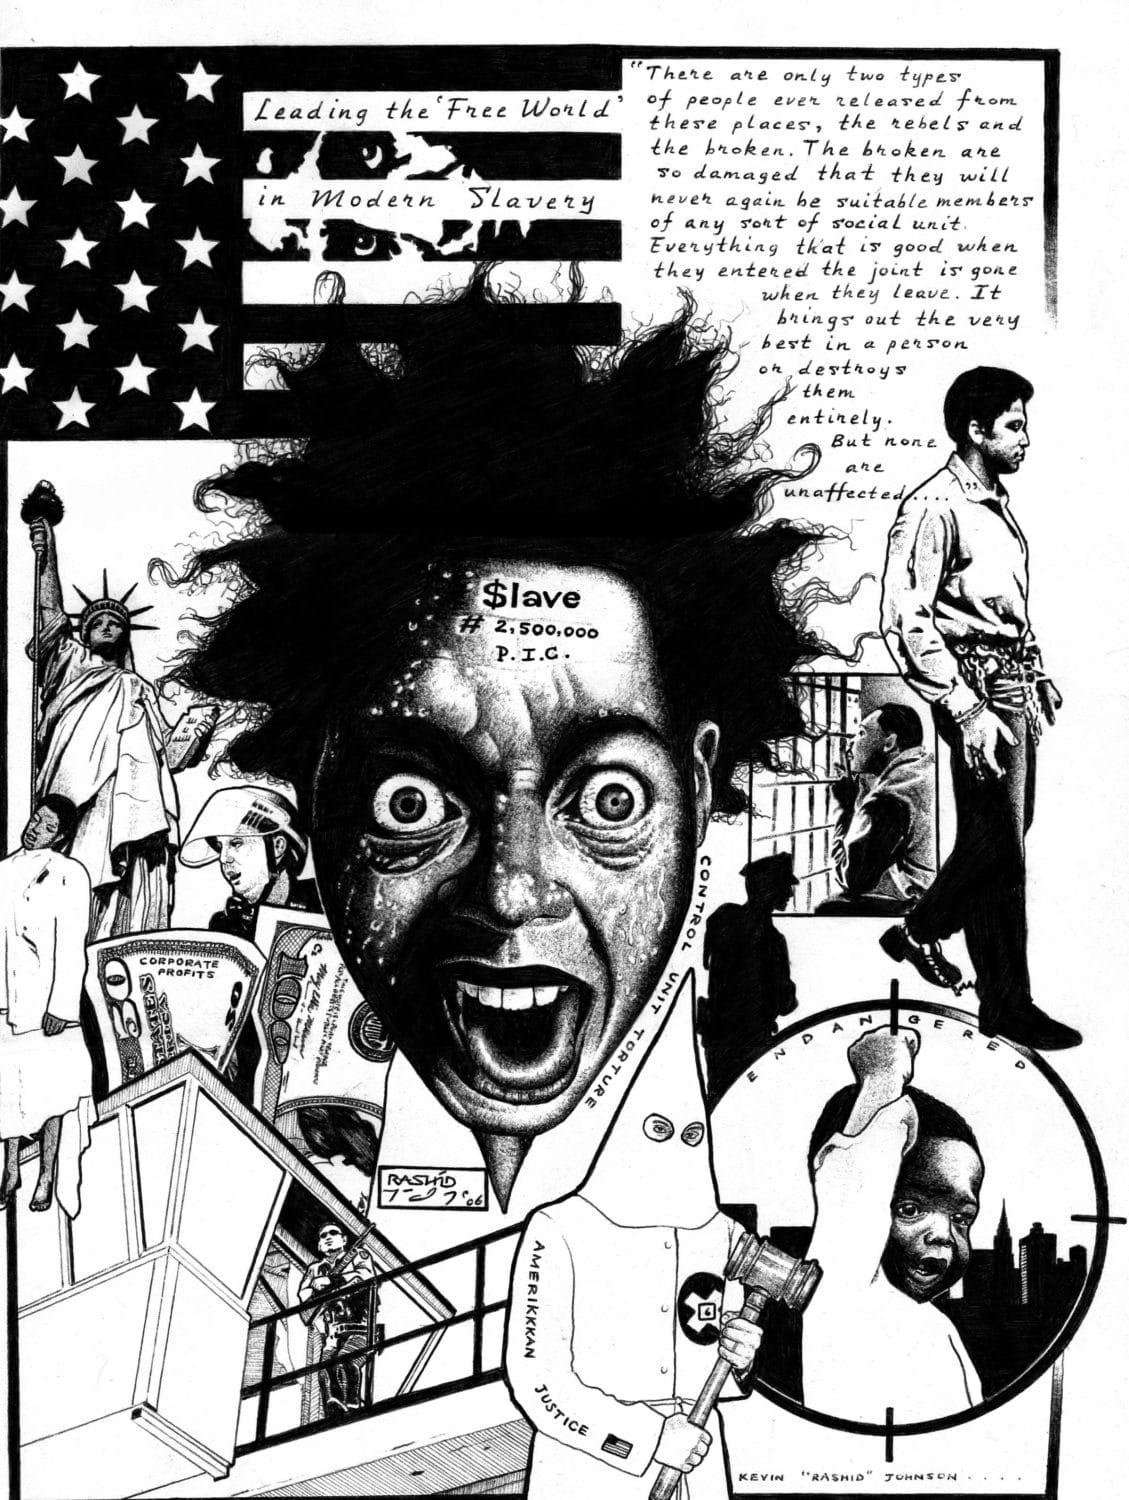 Control-Unit-Torture-art-by-Kevin-Rashid-Johnson, Torment in Indiana prisons: The abuse, the lawsuit, the death of Phillip Littler, Abolition Now! 